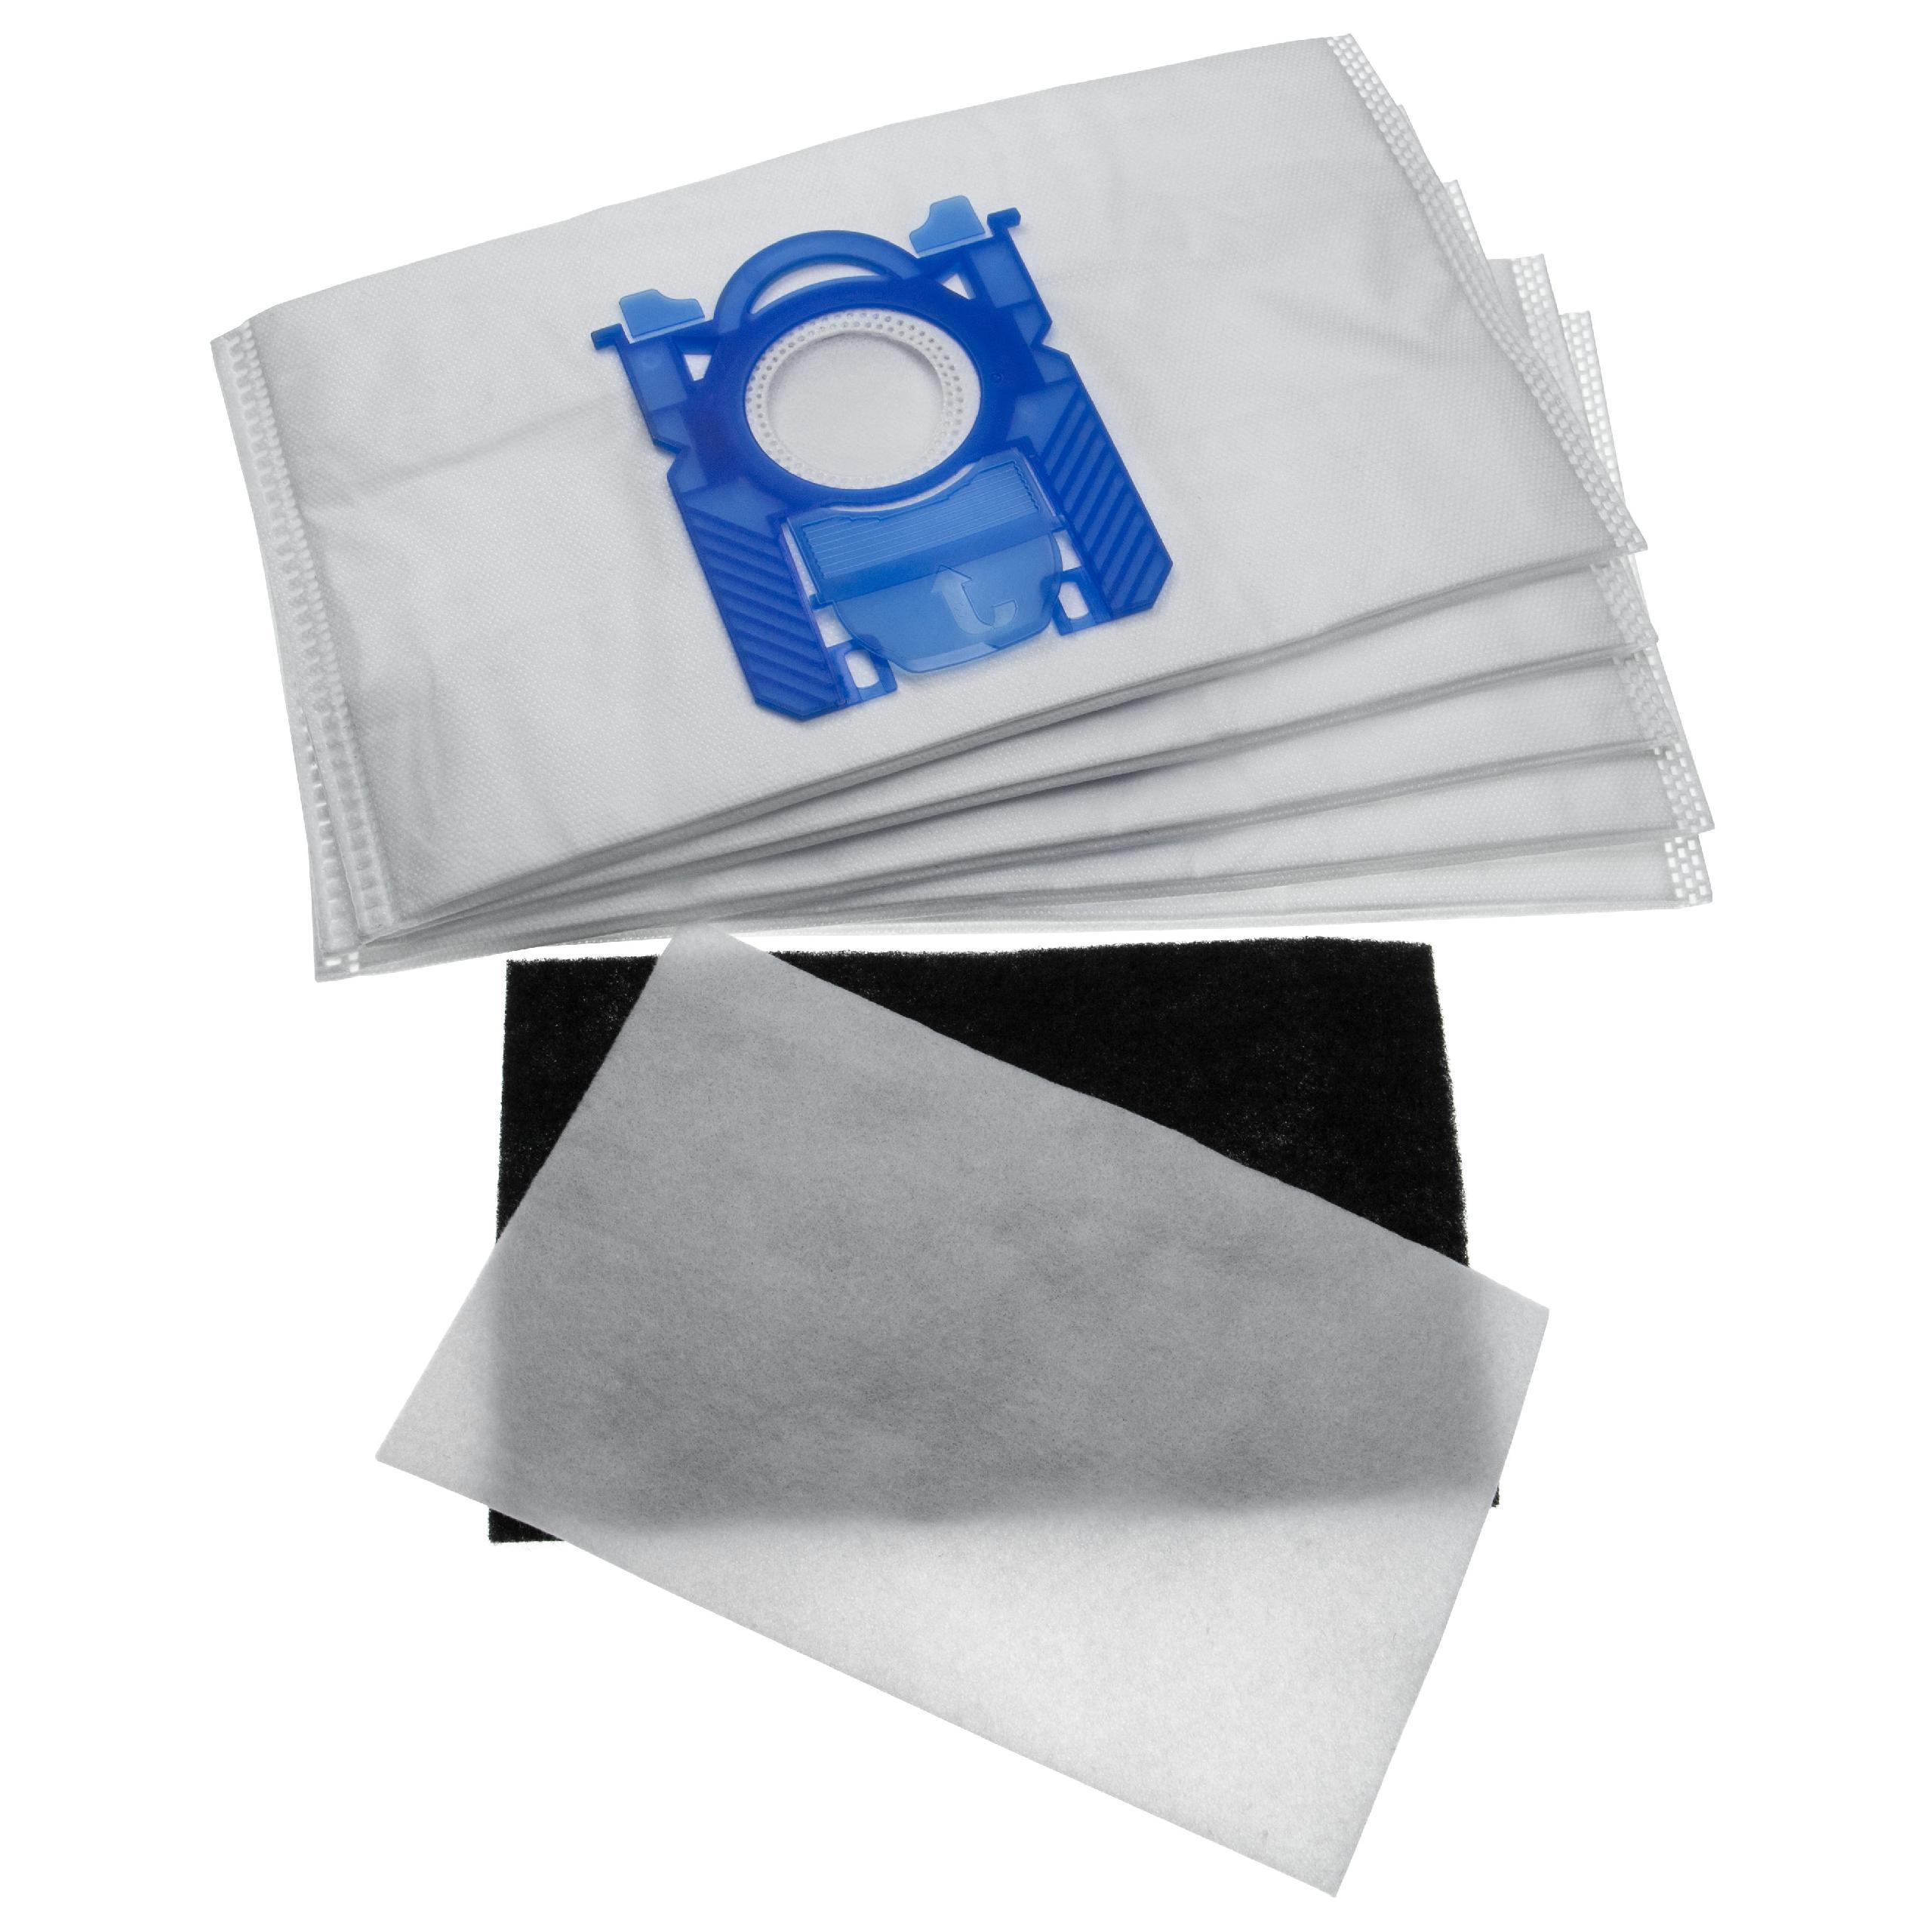 10x Vacuum Cleaner Bag replaces AEG GR210SM, 9001688366 for Philips - microfleece